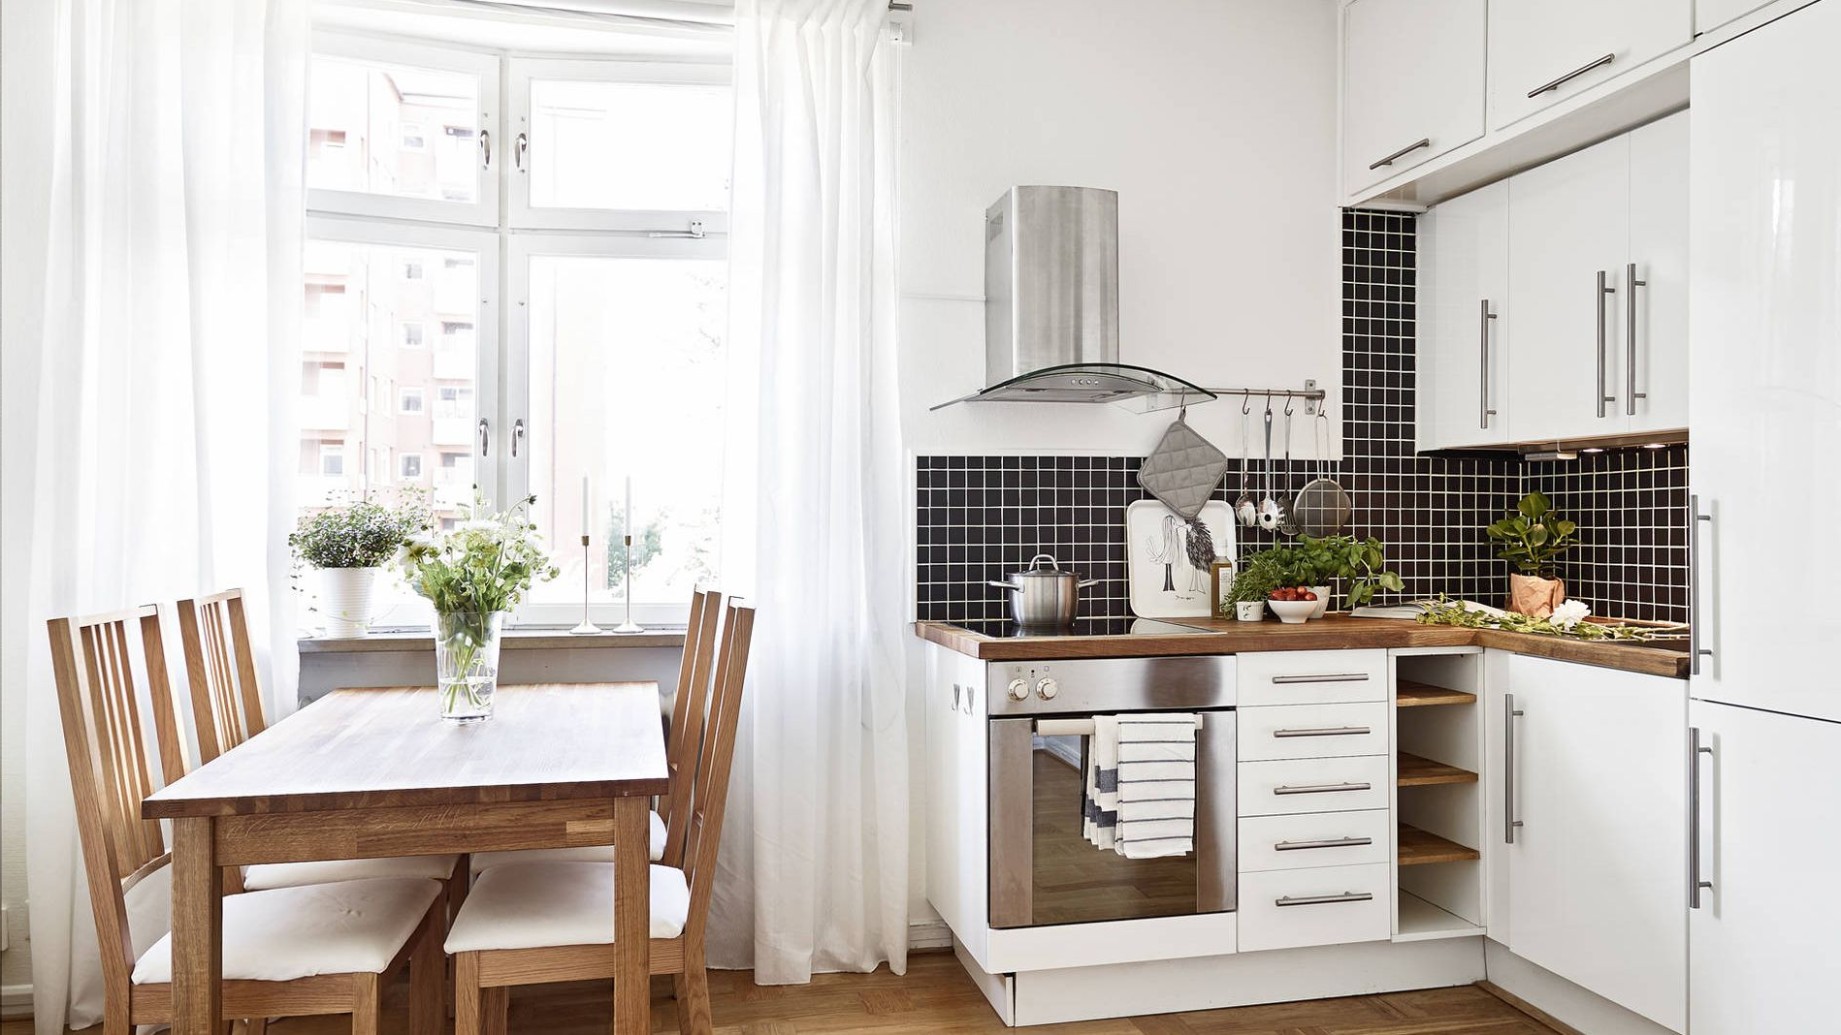 4 Space-Making Hacks for Small Kitchens - how do you maximize storage in a small kitchen?